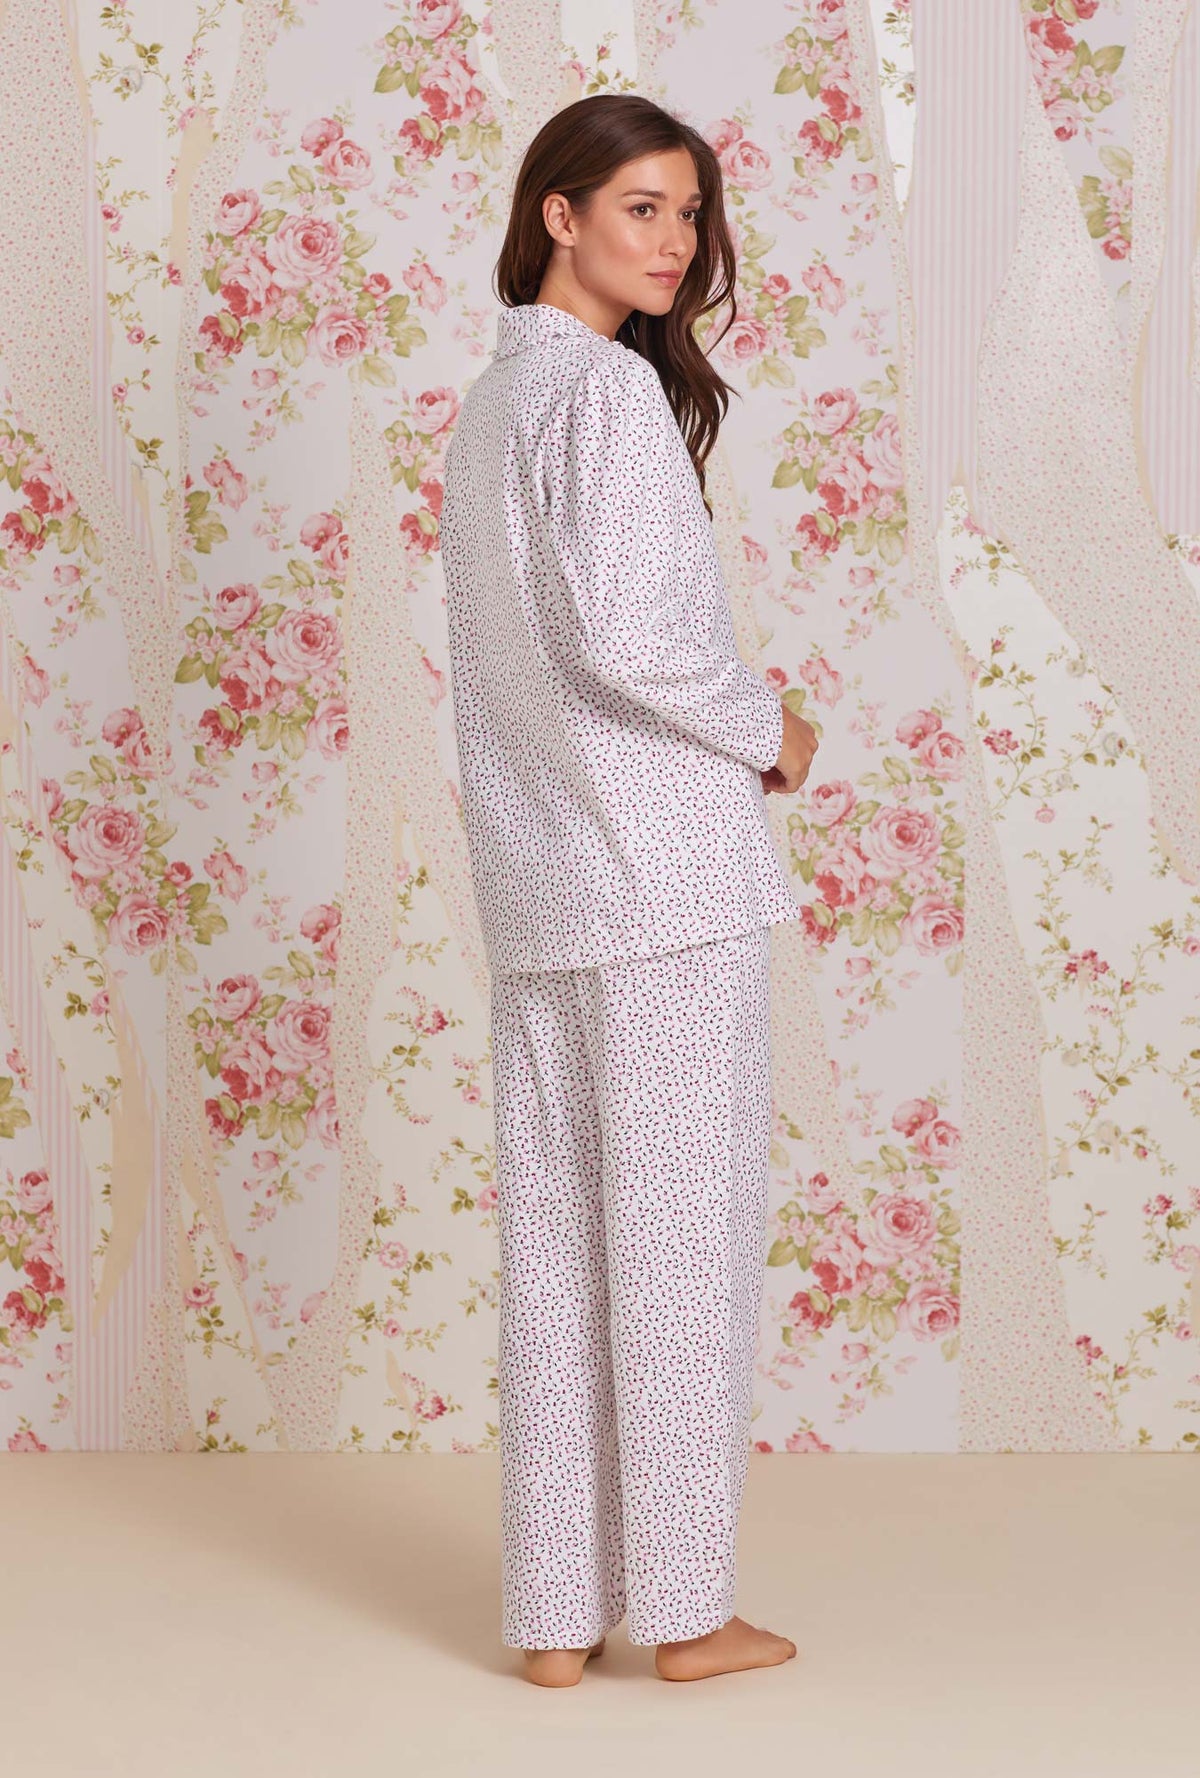 A lady wearing white long sleeve cotton flannel classic notch pajama with joyful berry print.